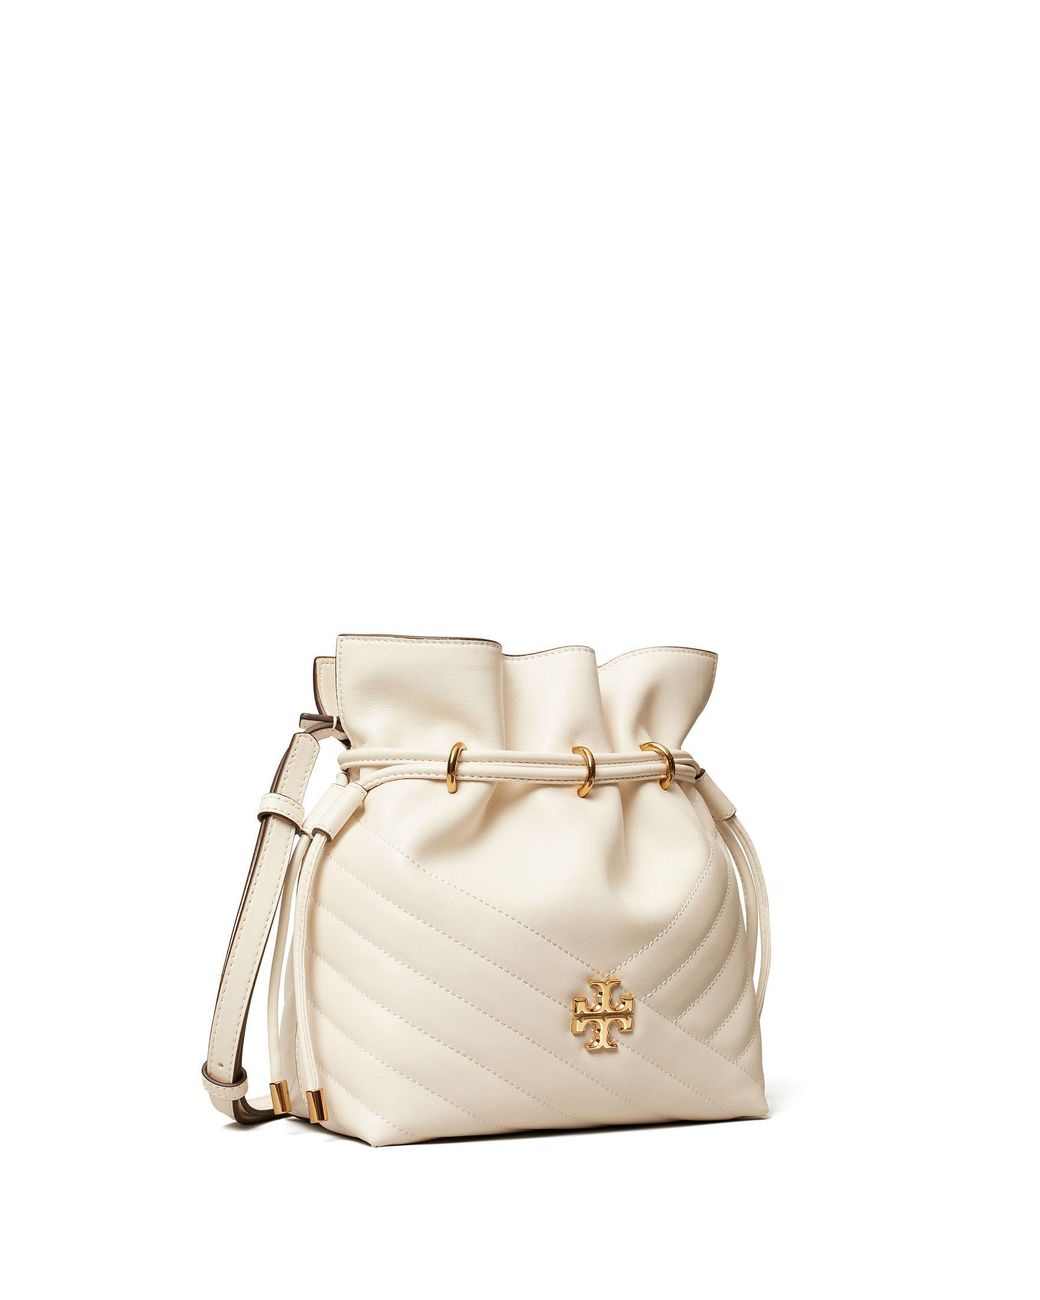 Tory Burch Kira Chevron Mini Bucket Bag Review: a style influencer review  of the spring 2020 Tory Burch Kira Bucket Bag in Pink City.